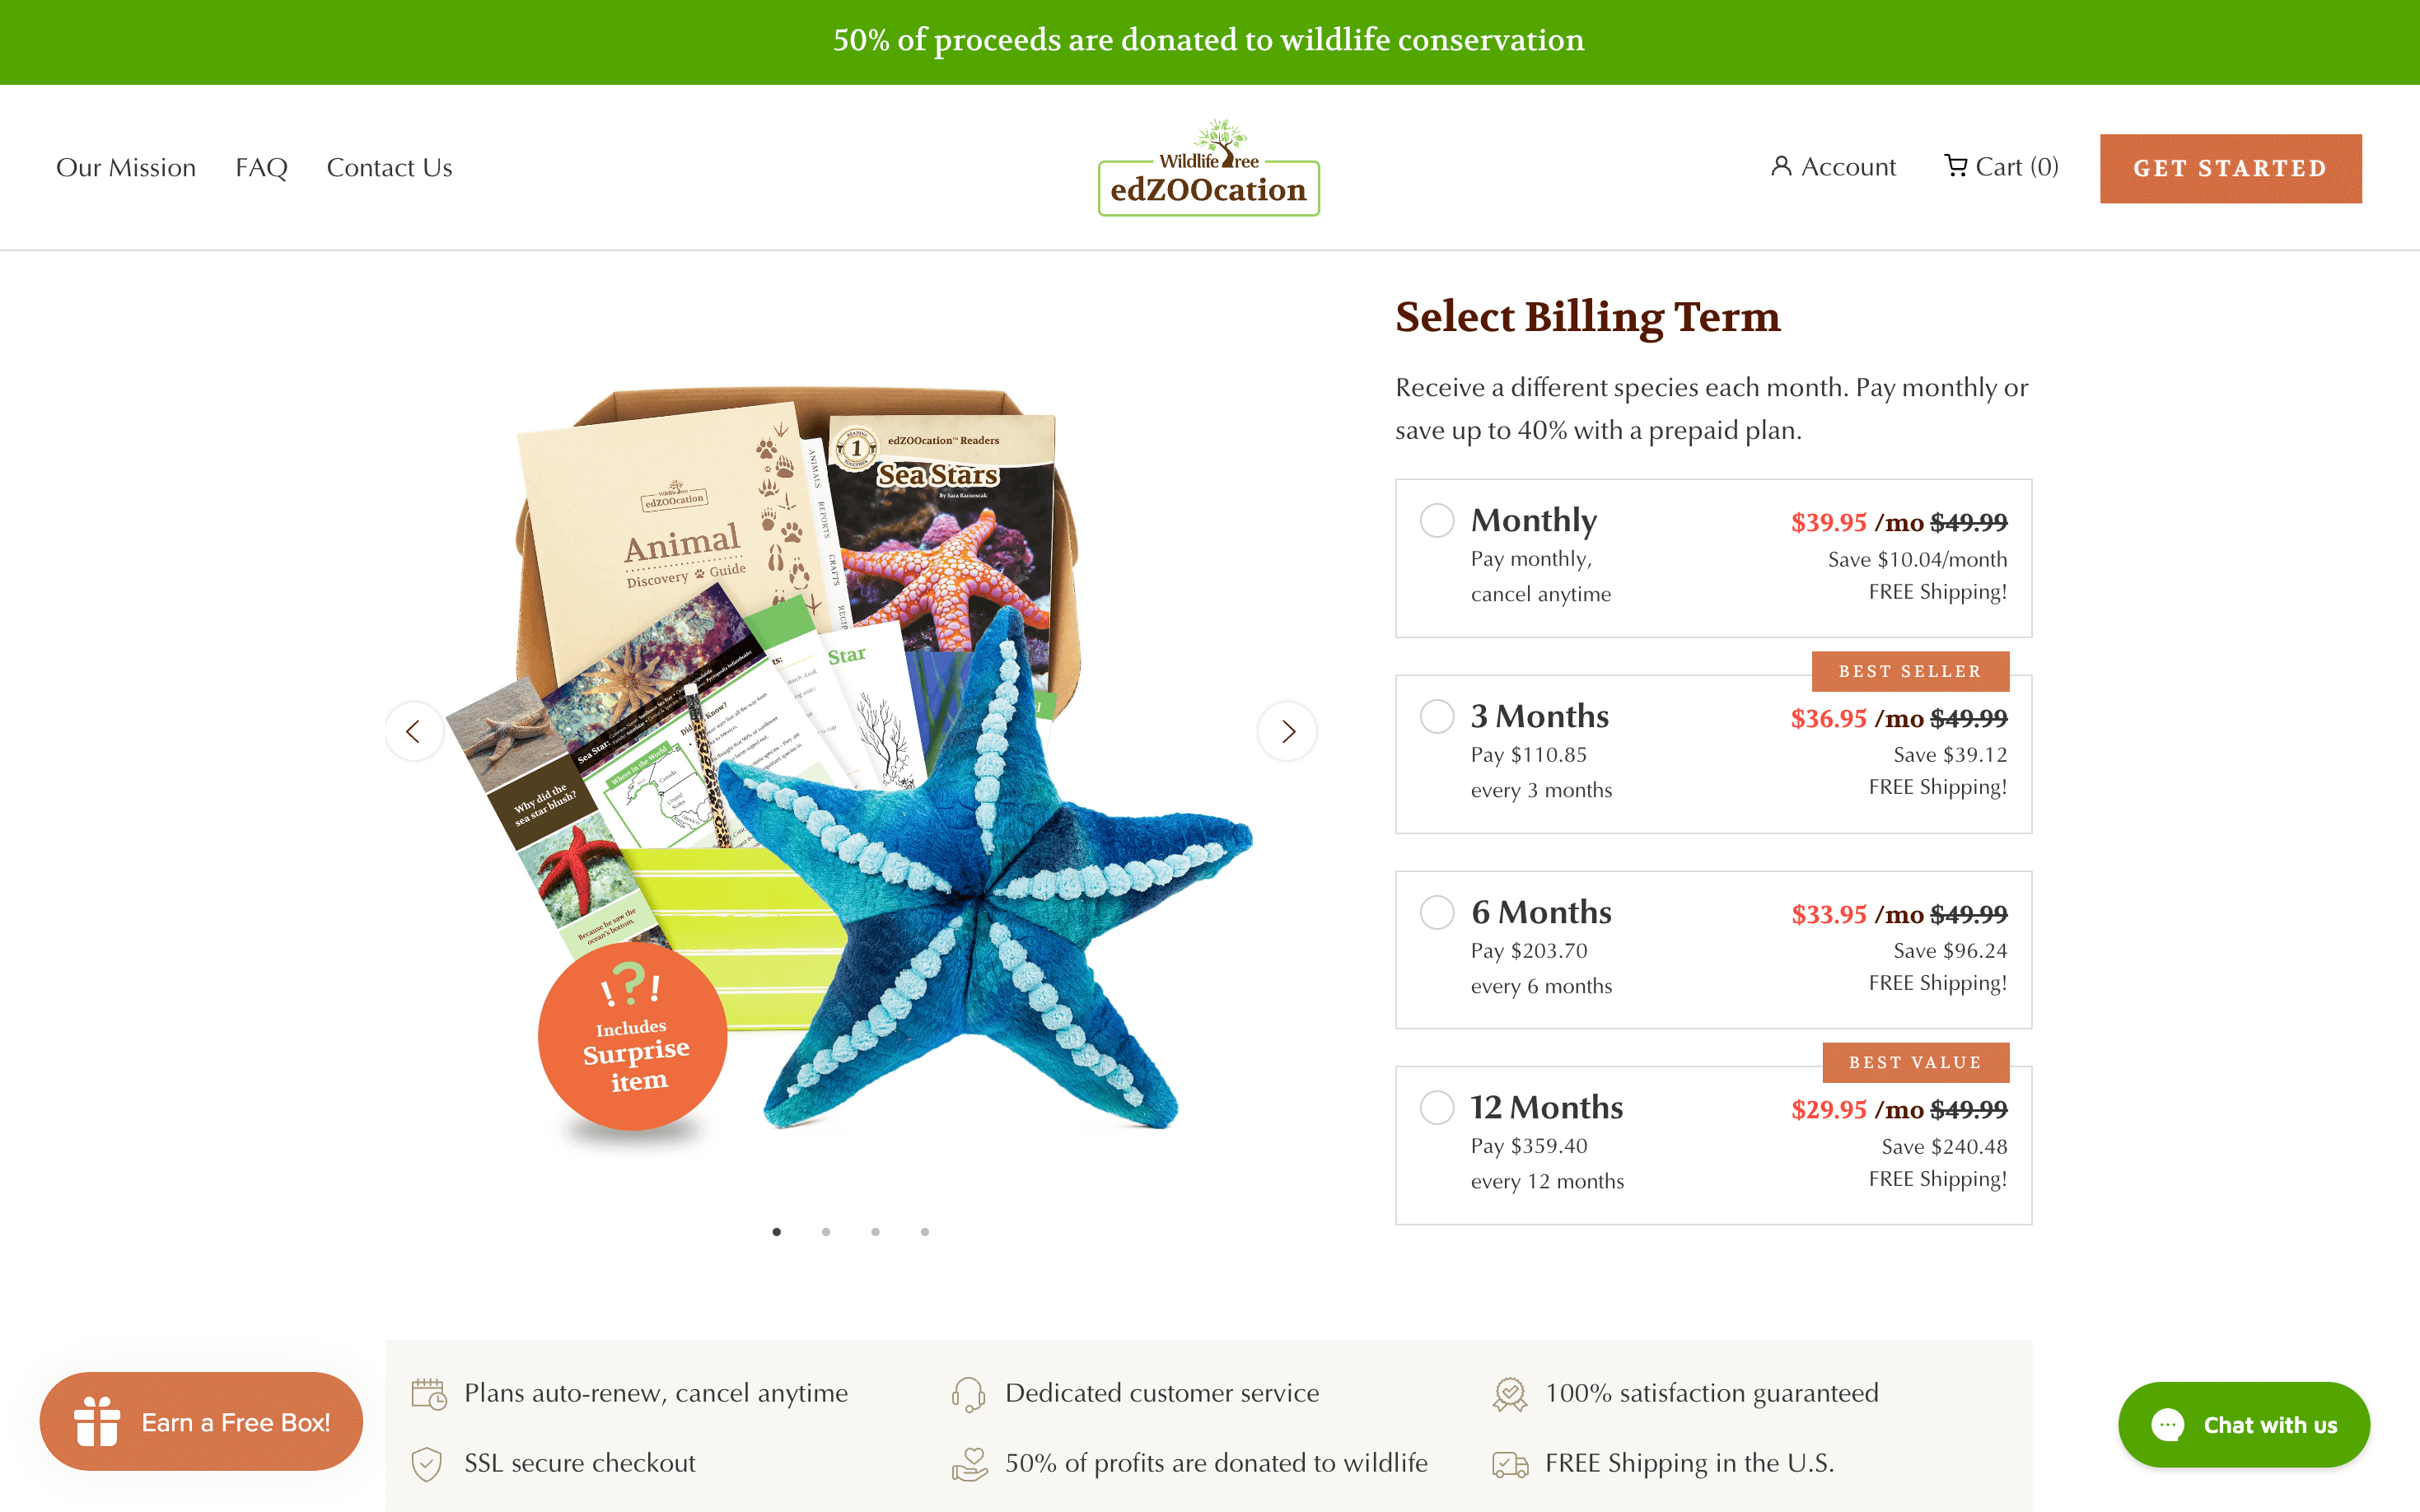 A screenshot of the product page for edZOOcation’s subscription box. There are options to purchase monthly, every 3 months, 6 months, or 12 months. 